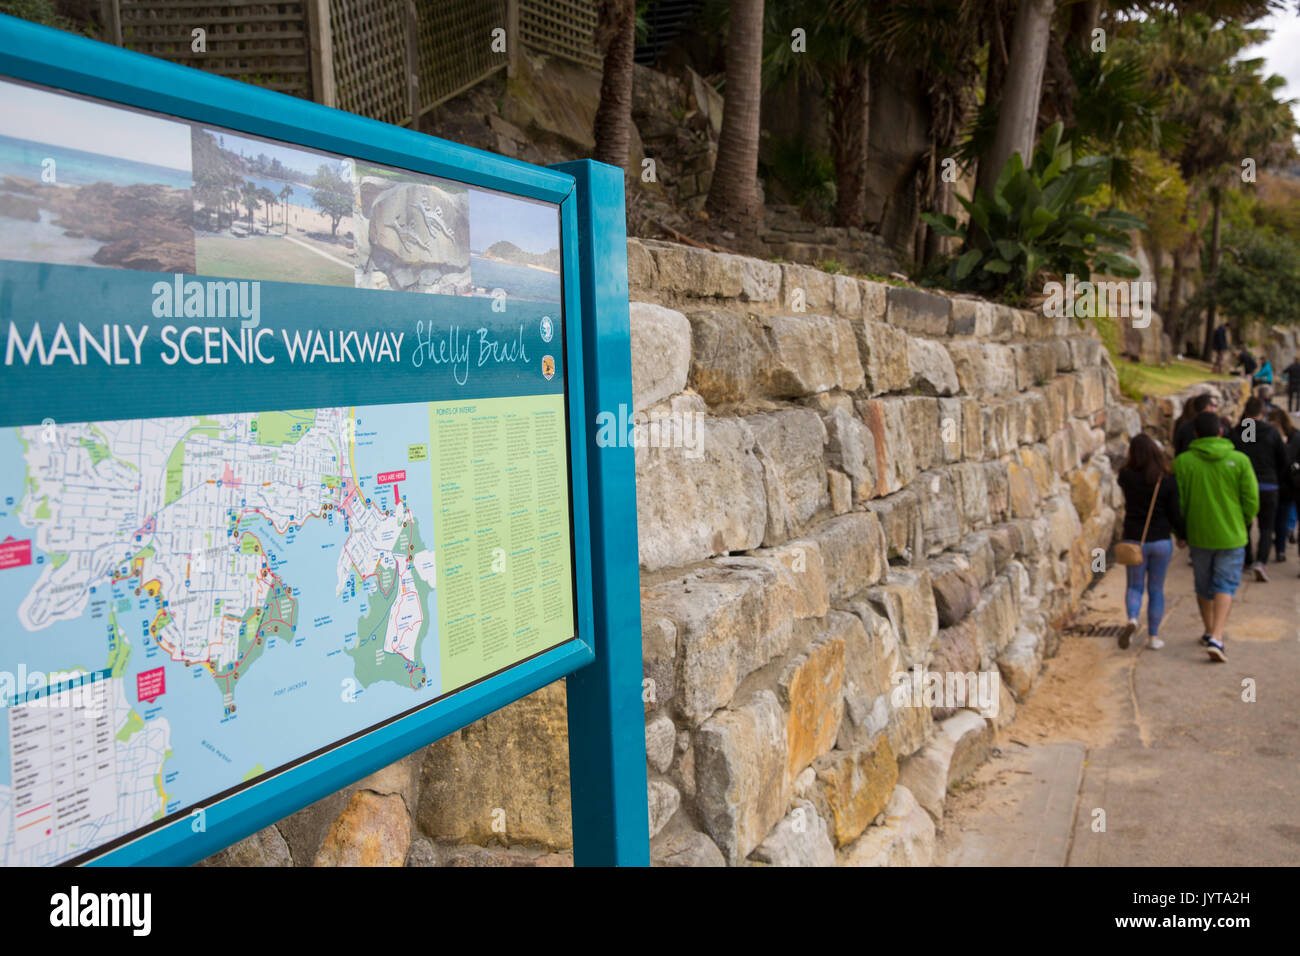 Manly to Shelly beach scenic walkway coastal path at Manly beach,Sydney northern beaches,Australia Stock Photo